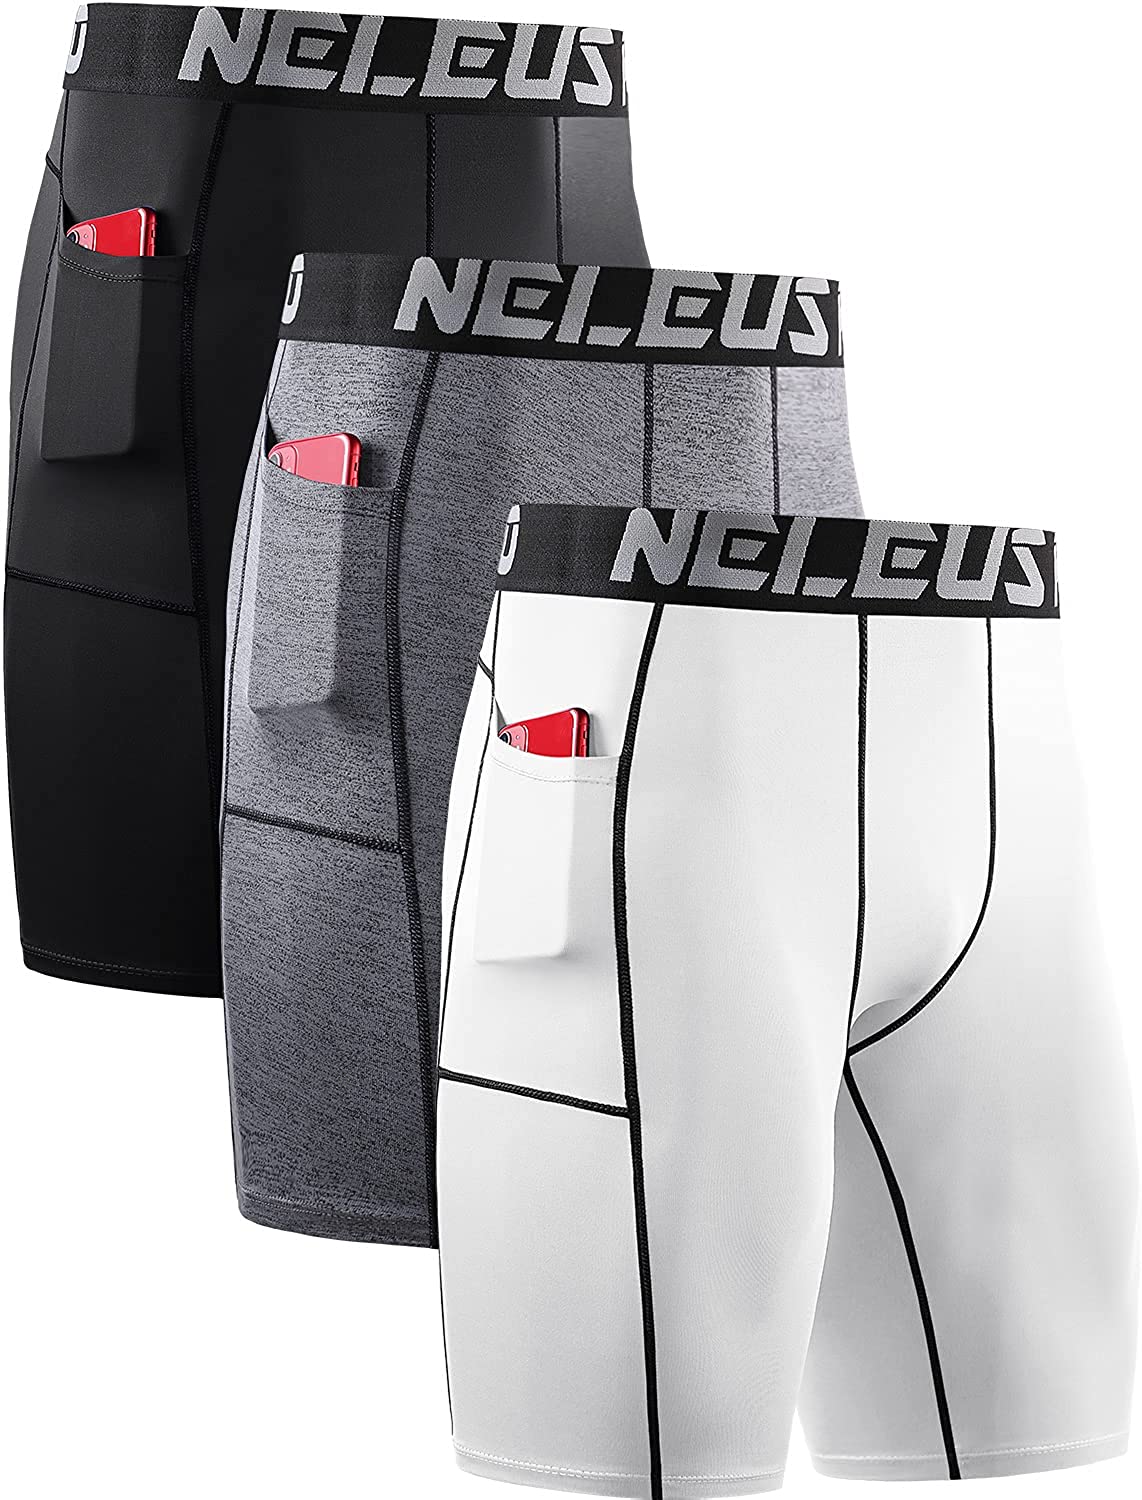 NELEUS Men's Compression Short with Pocket Dry Fit Yoga Running Shorts Pack  of 3